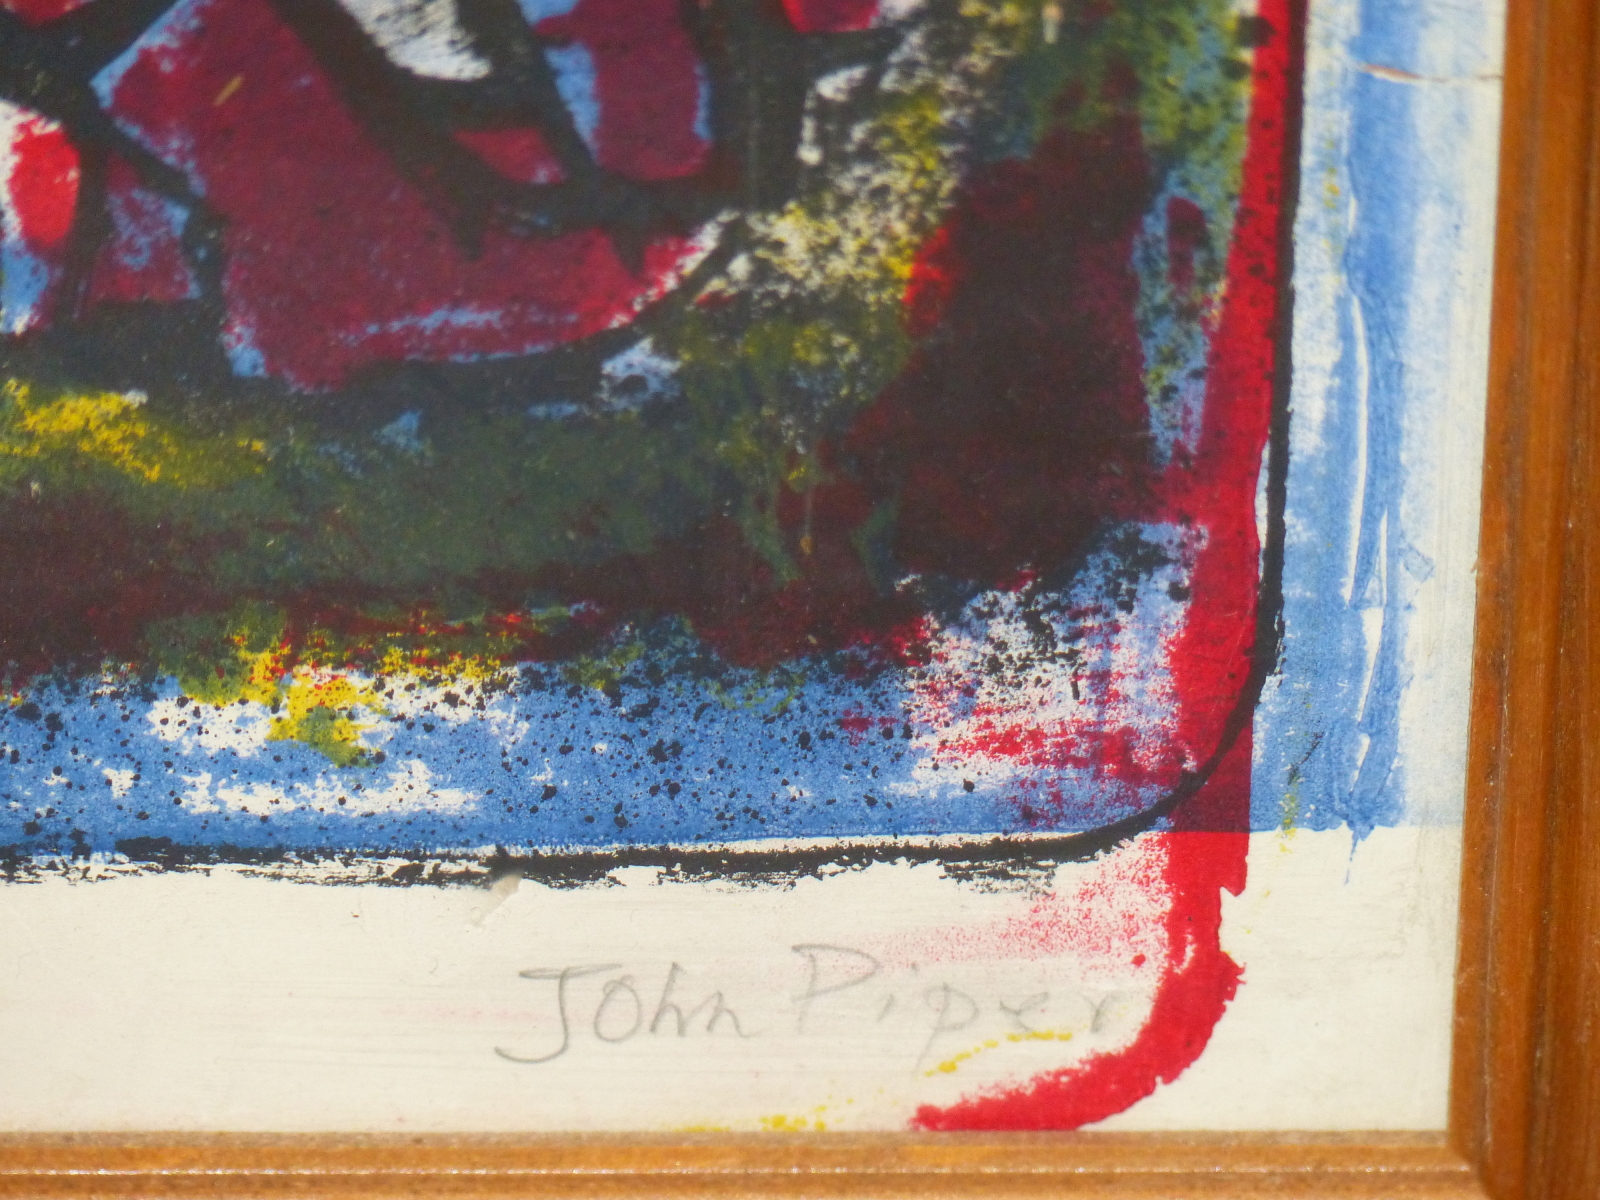 CIRCLE OF JOHN PIPER, FIGURES SUPPLICATING TO A CHRIST LIKE FIGURE, BEARS SIGNATURE IN PENCIL, - Image 3 of 5